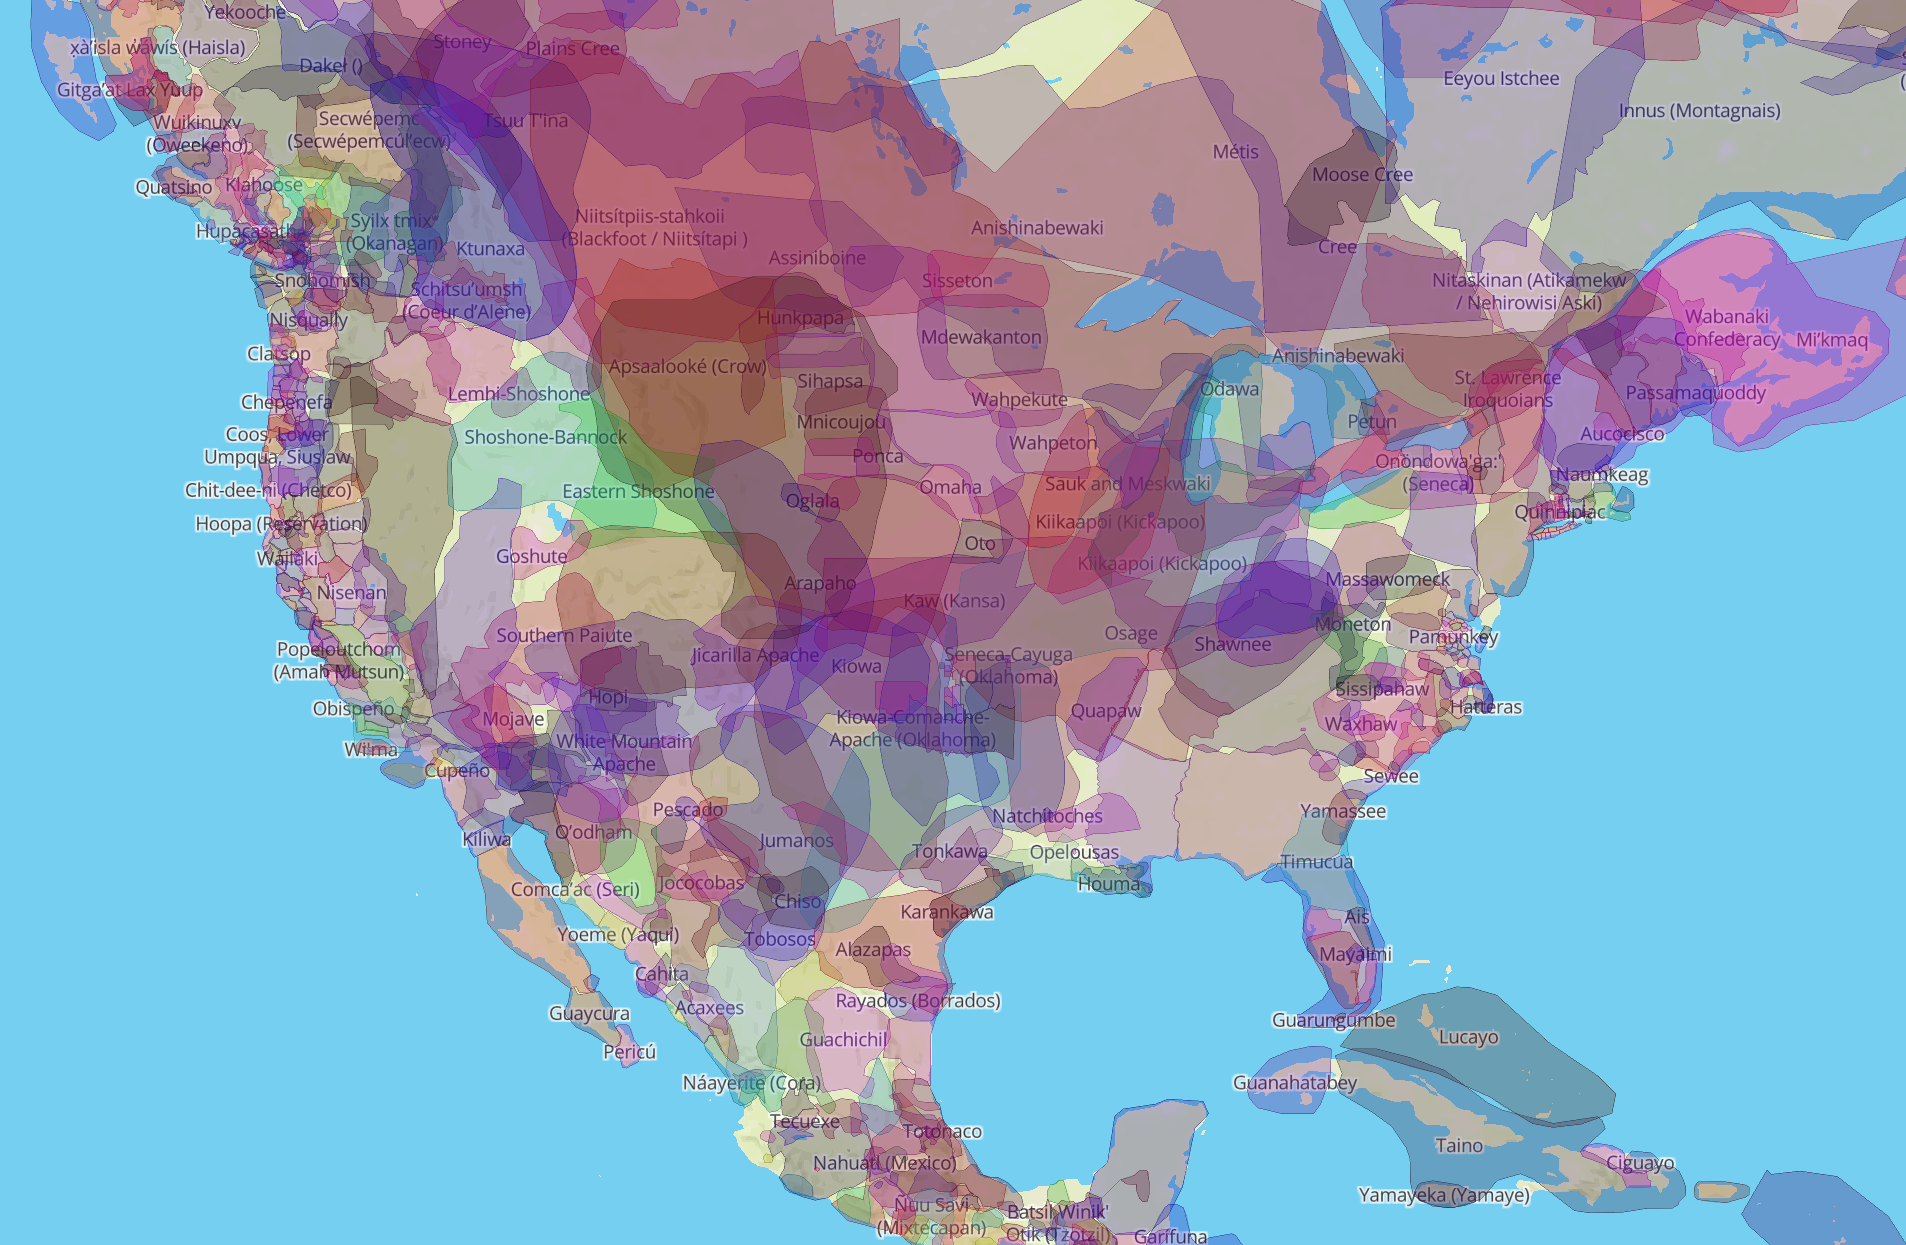 Native Land is a tool that maps out Indigenous territories, treaties, and languages.